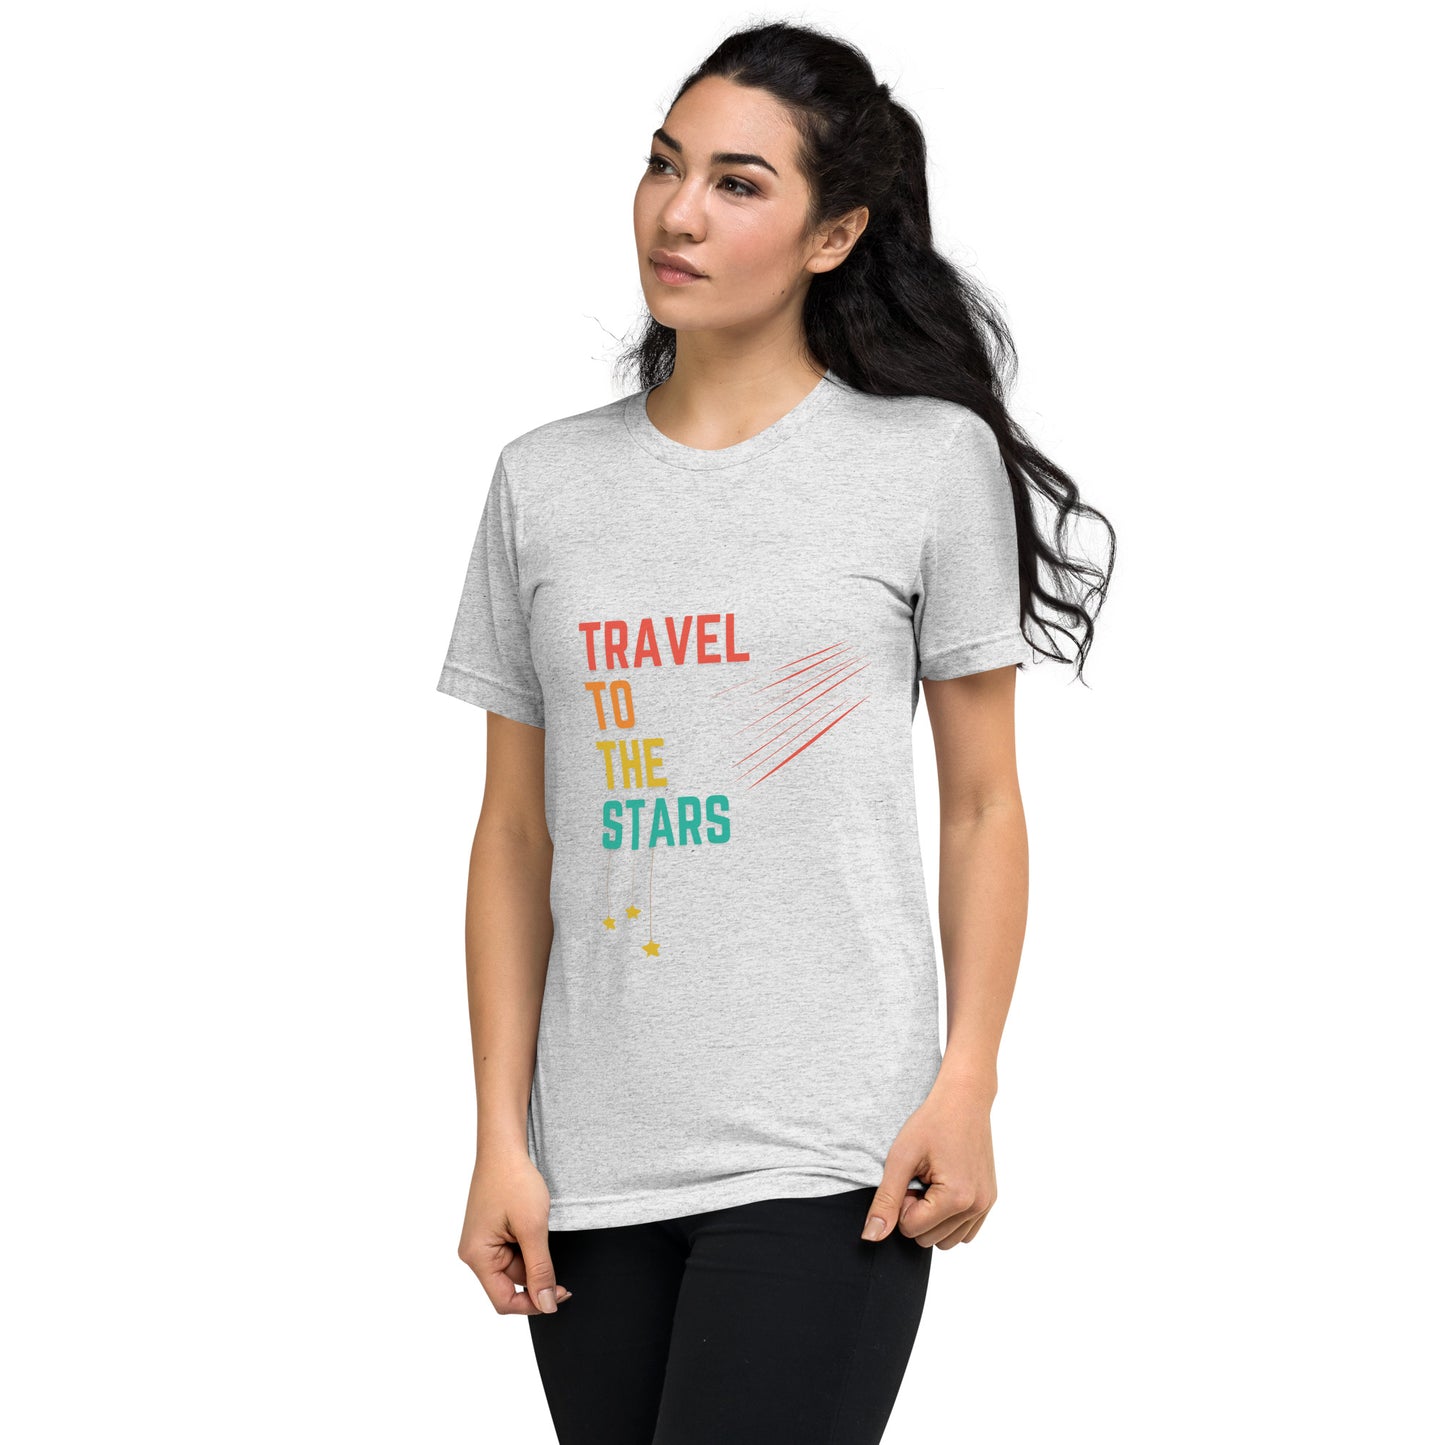 Stellar Journey, Travel, T-shirt, Stars, Inspirational, Motivational, Colorful, Fast, Going in style, Galactic travel, Dreams, Unisex